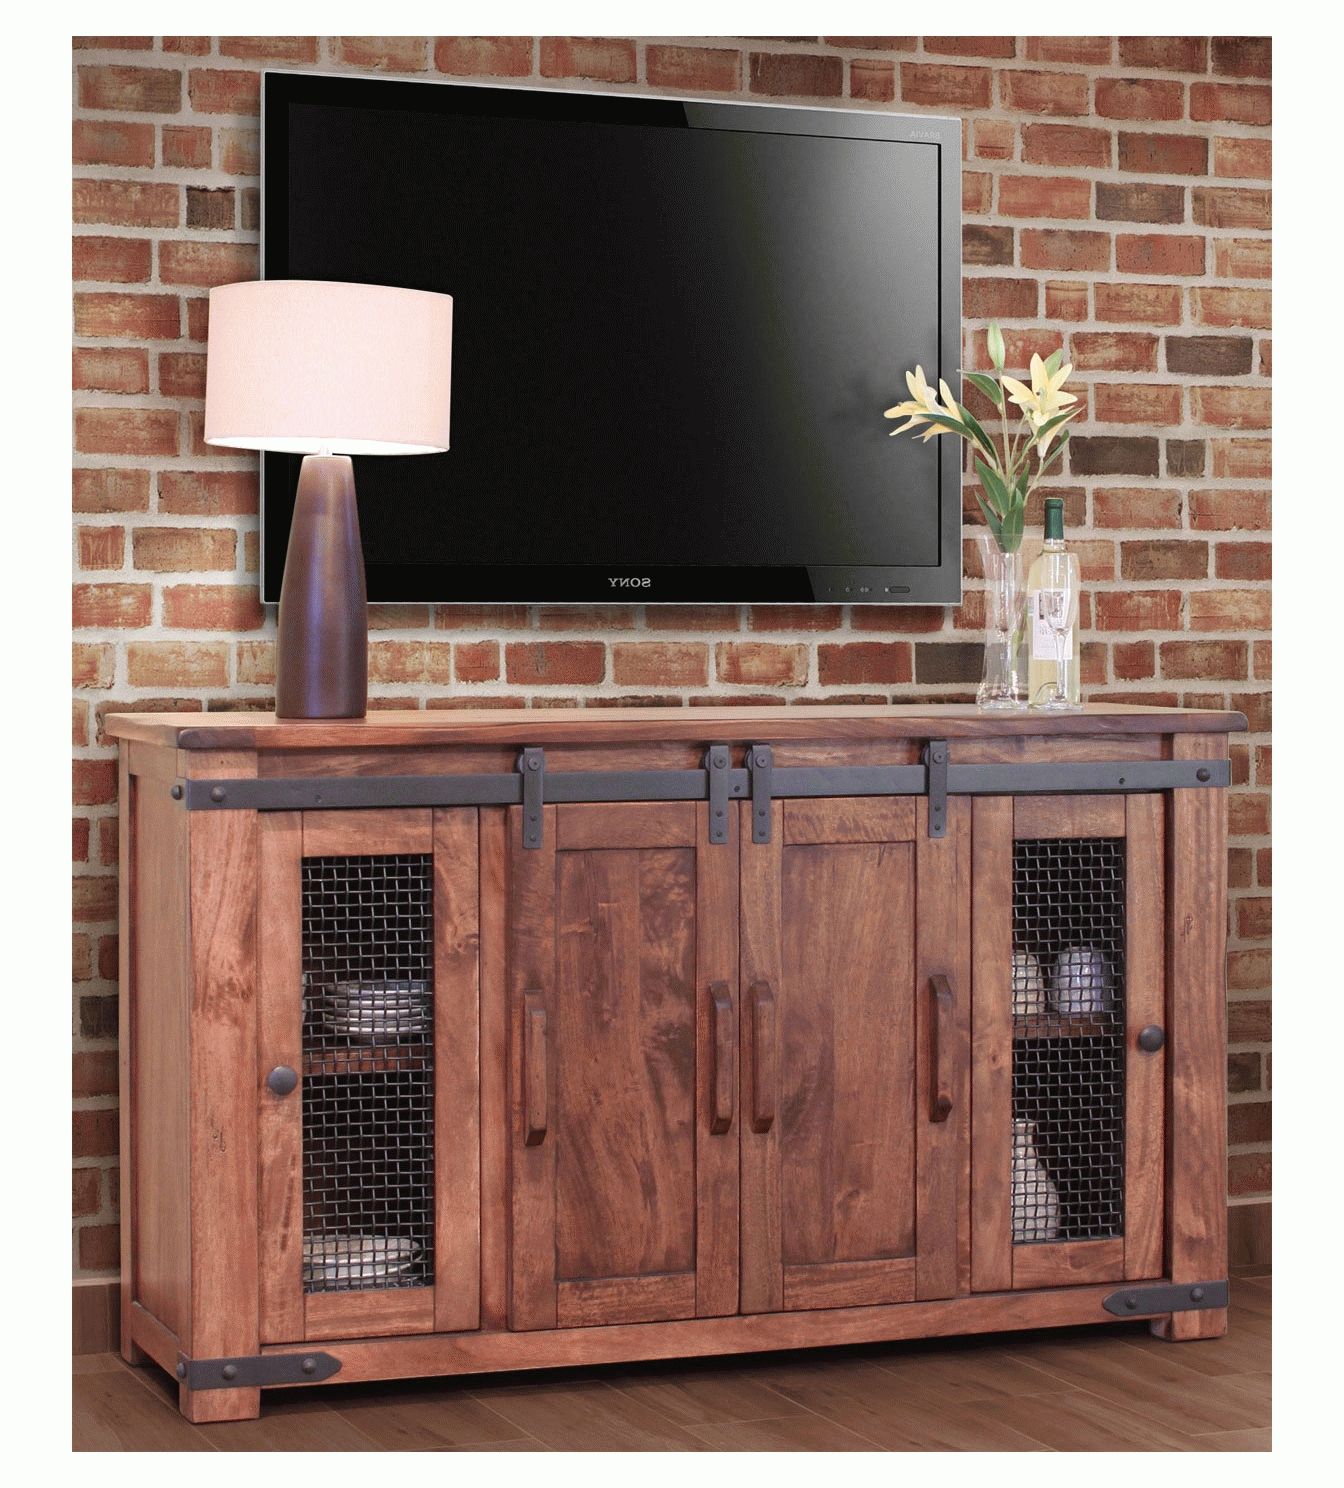 Rustic Barn Door Tv Stand, Barn Door Tv Stand, Barn Door Tv Console Throughout Rustic Tv Stands (Gallery 3 of 15)